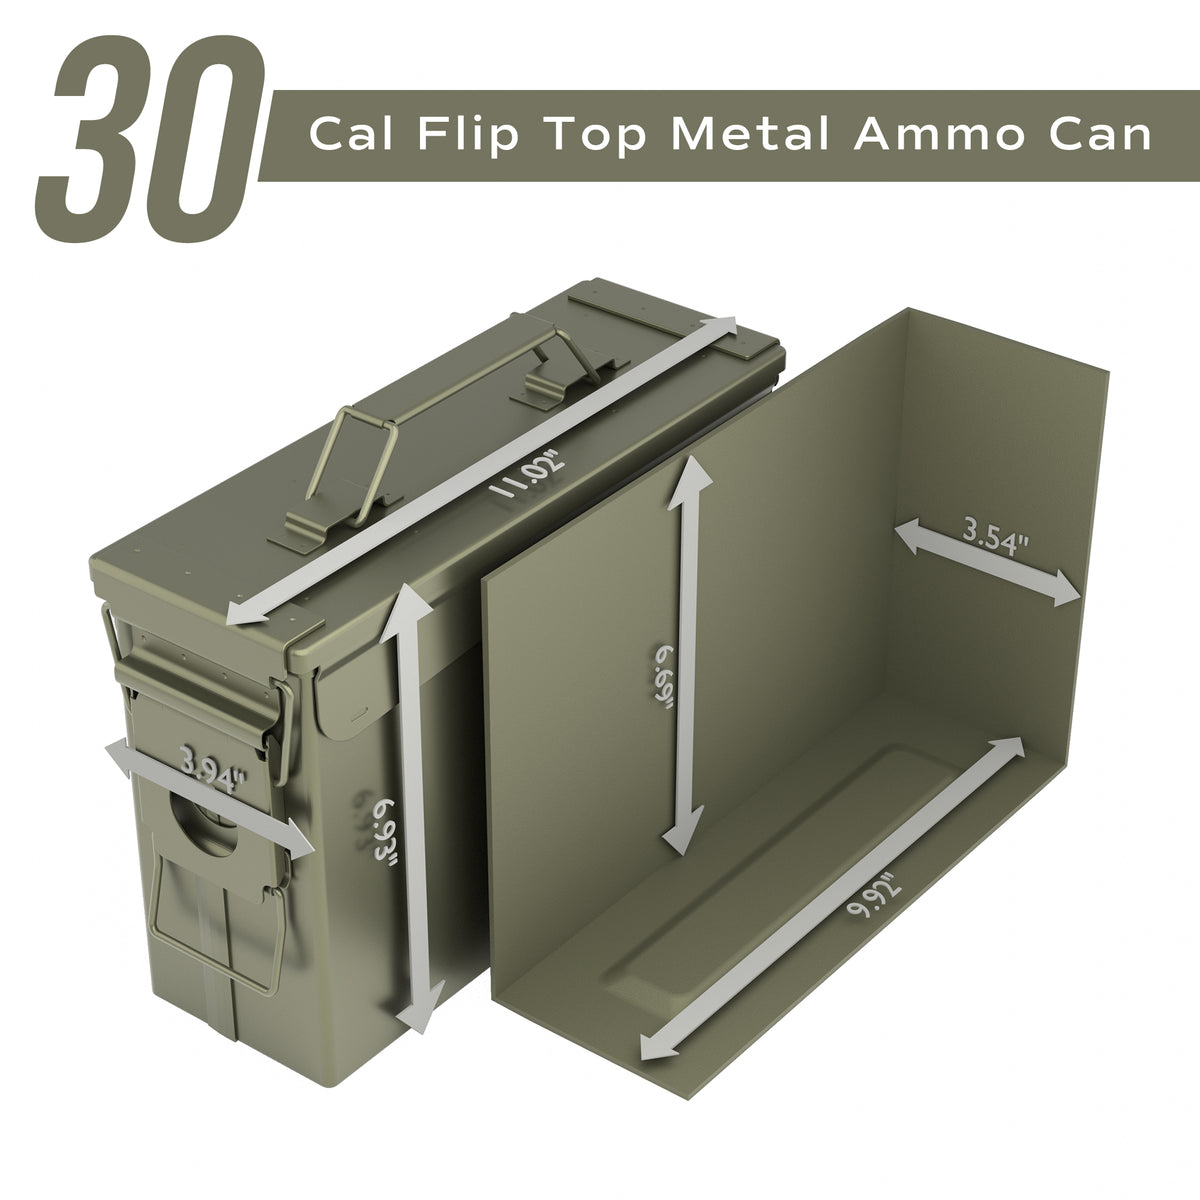 RPNB AM191 Metal Ammo Can .30 Cal Military Heavy Gauge Water Resistant Ammo Box Dimensions